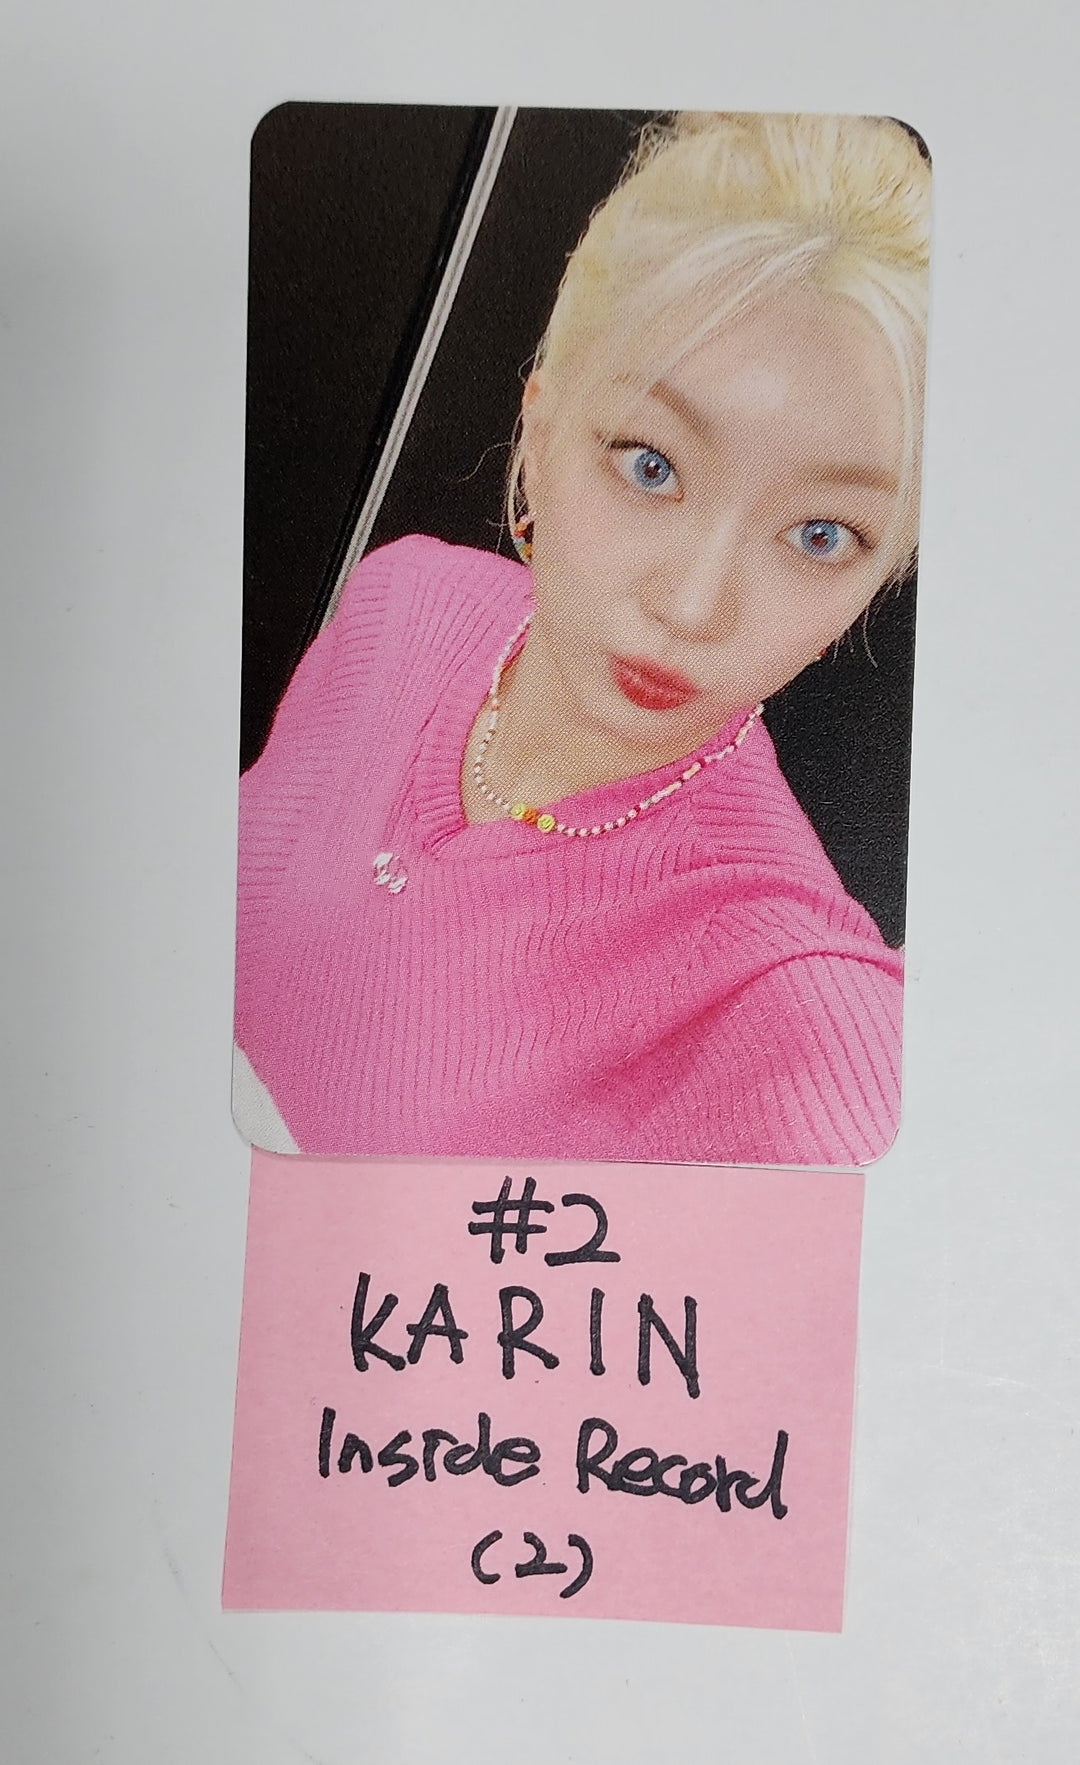 CRAXY "XX" - Inside Record Fansign Event Photocard